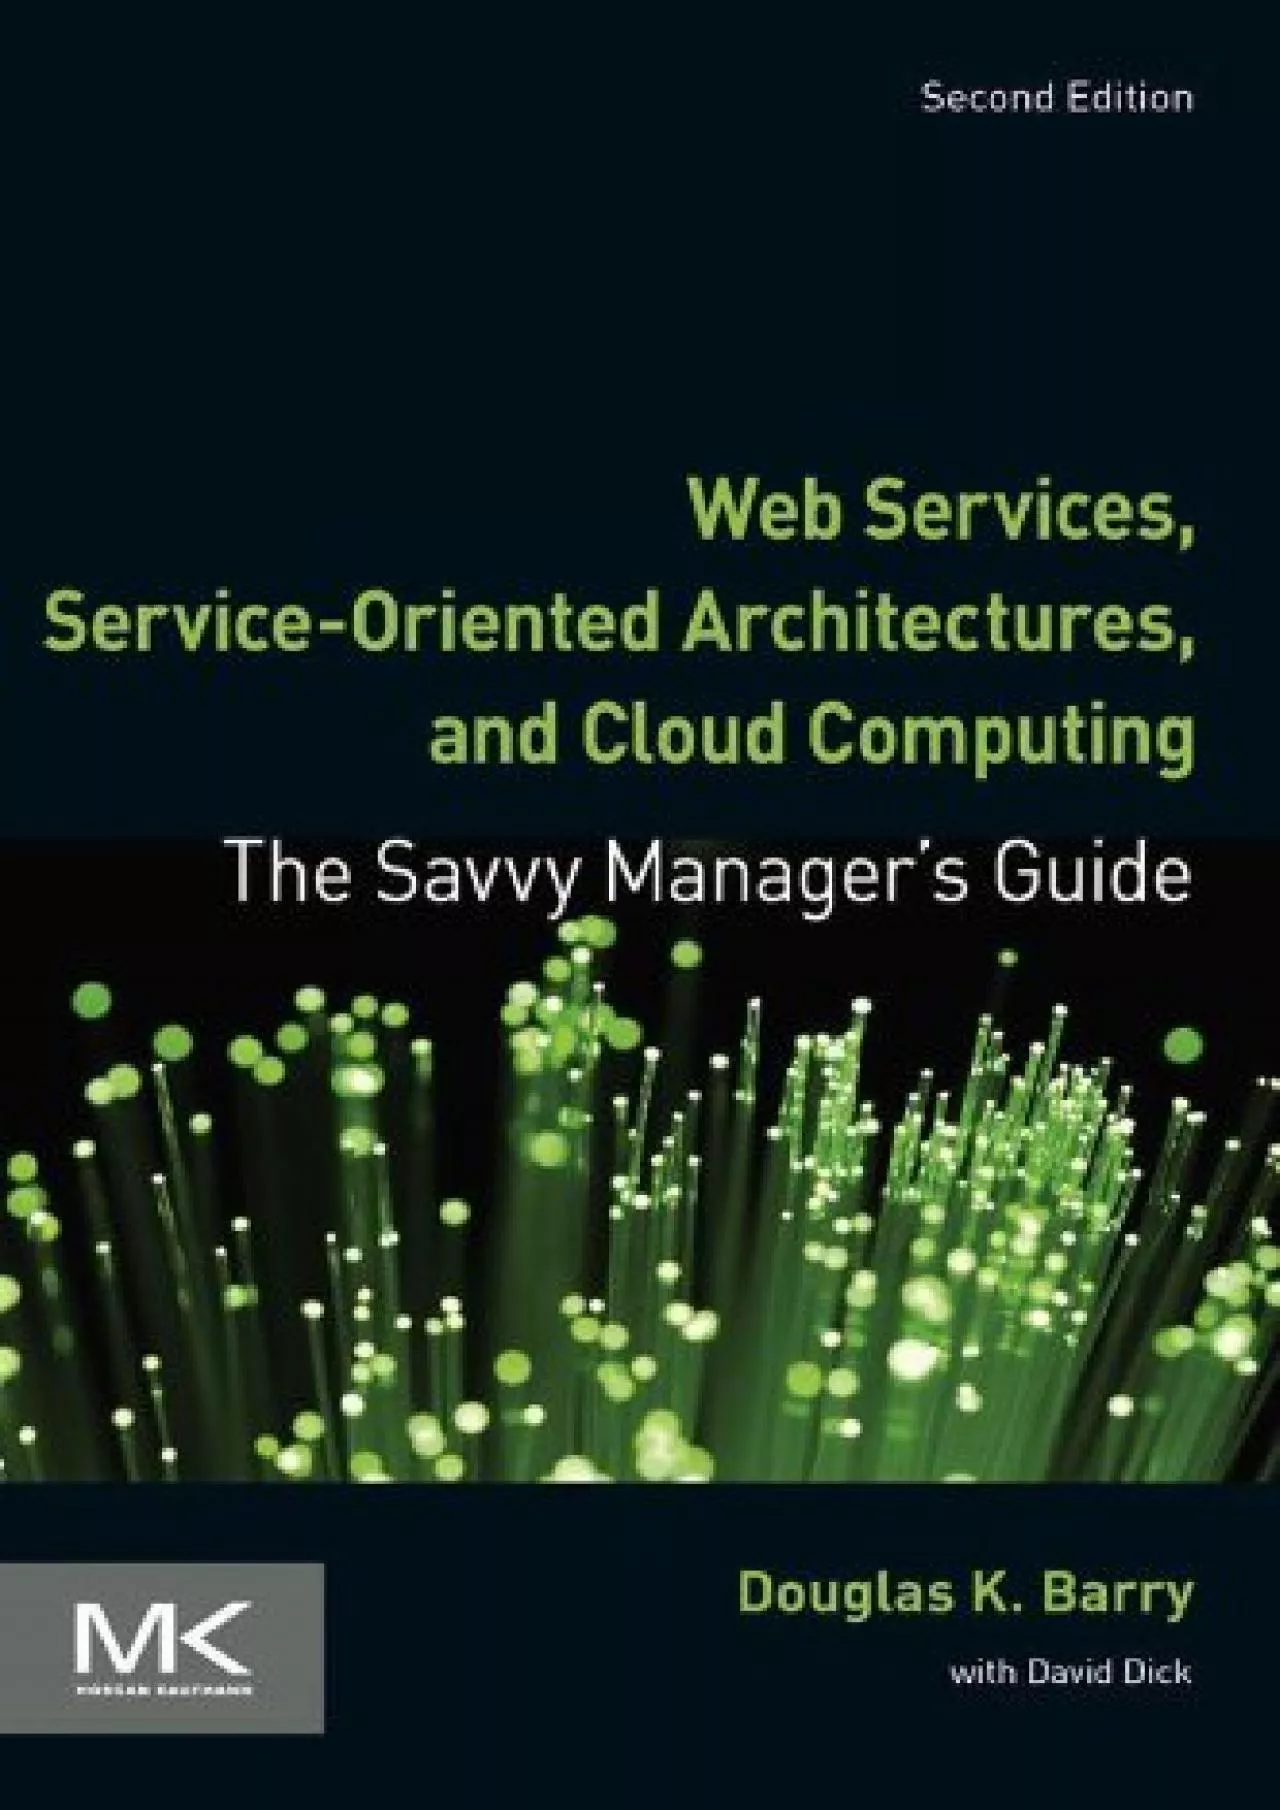 (DOWNLOAD)-Web Services, Service-Oriented Architectures, and Cloud Computing: The Savvy